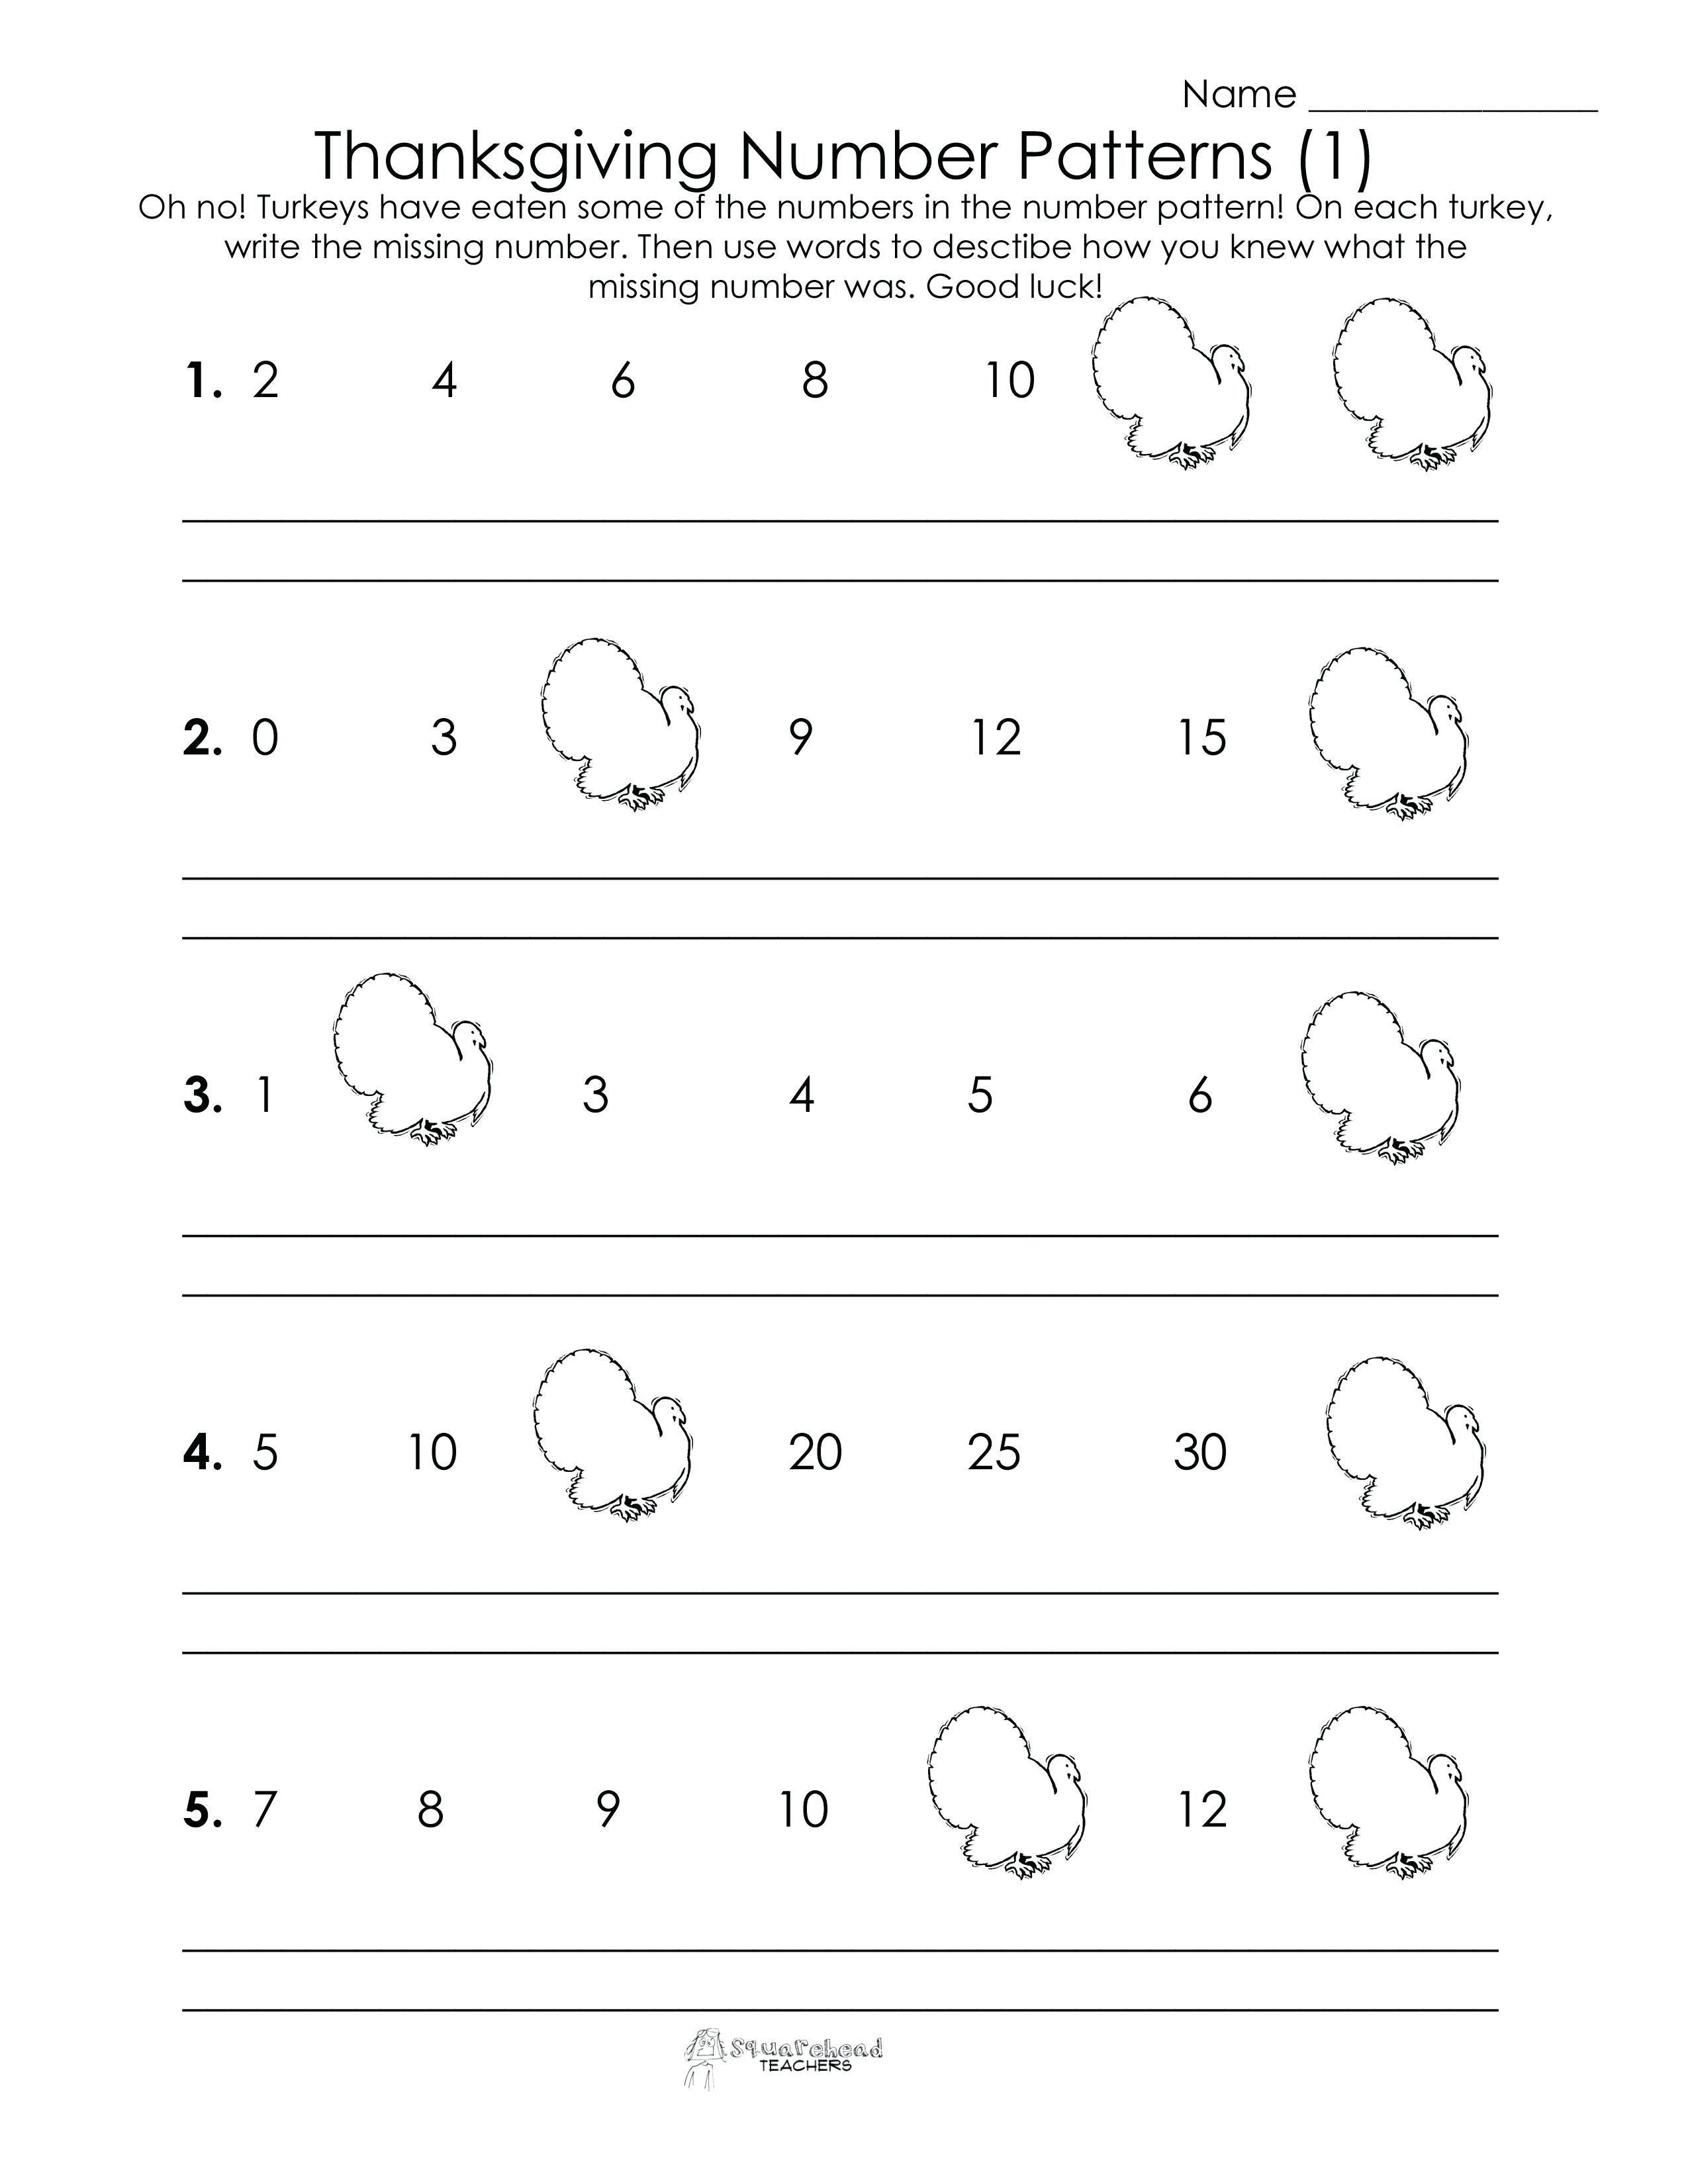 Sequence Printables Free Printable Sequencing Worksheets Grade 2 2 Also Sequencing Worksheets For Kindergarten